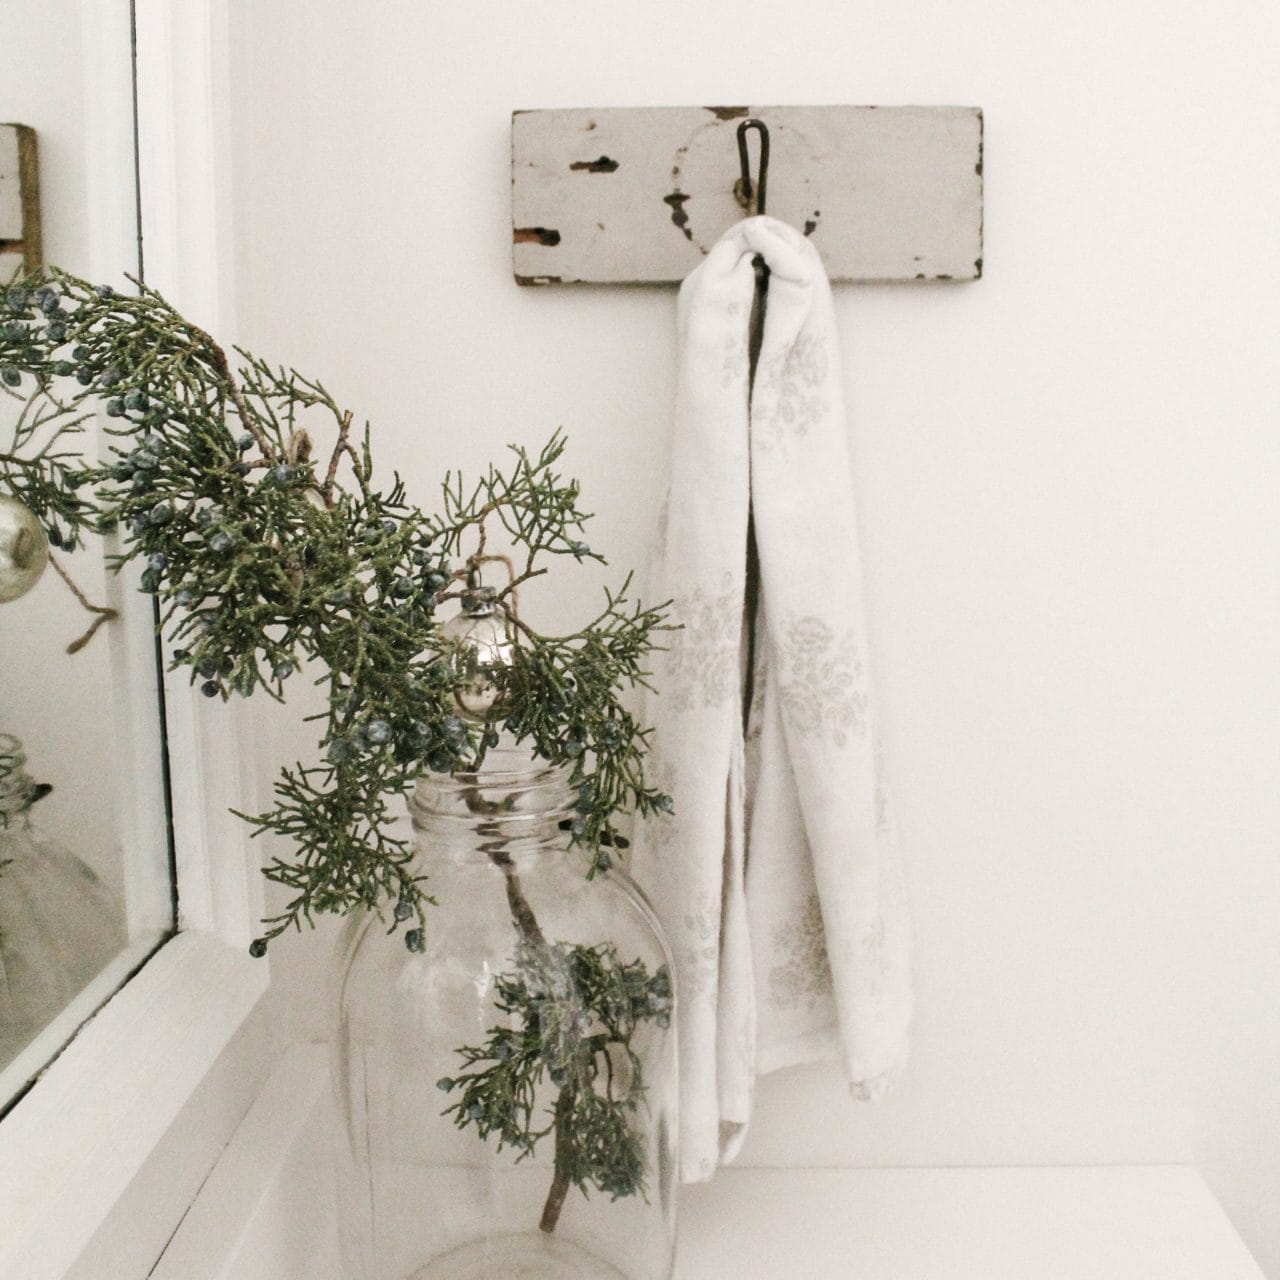 Adding Winter Touches to Your Bathroom